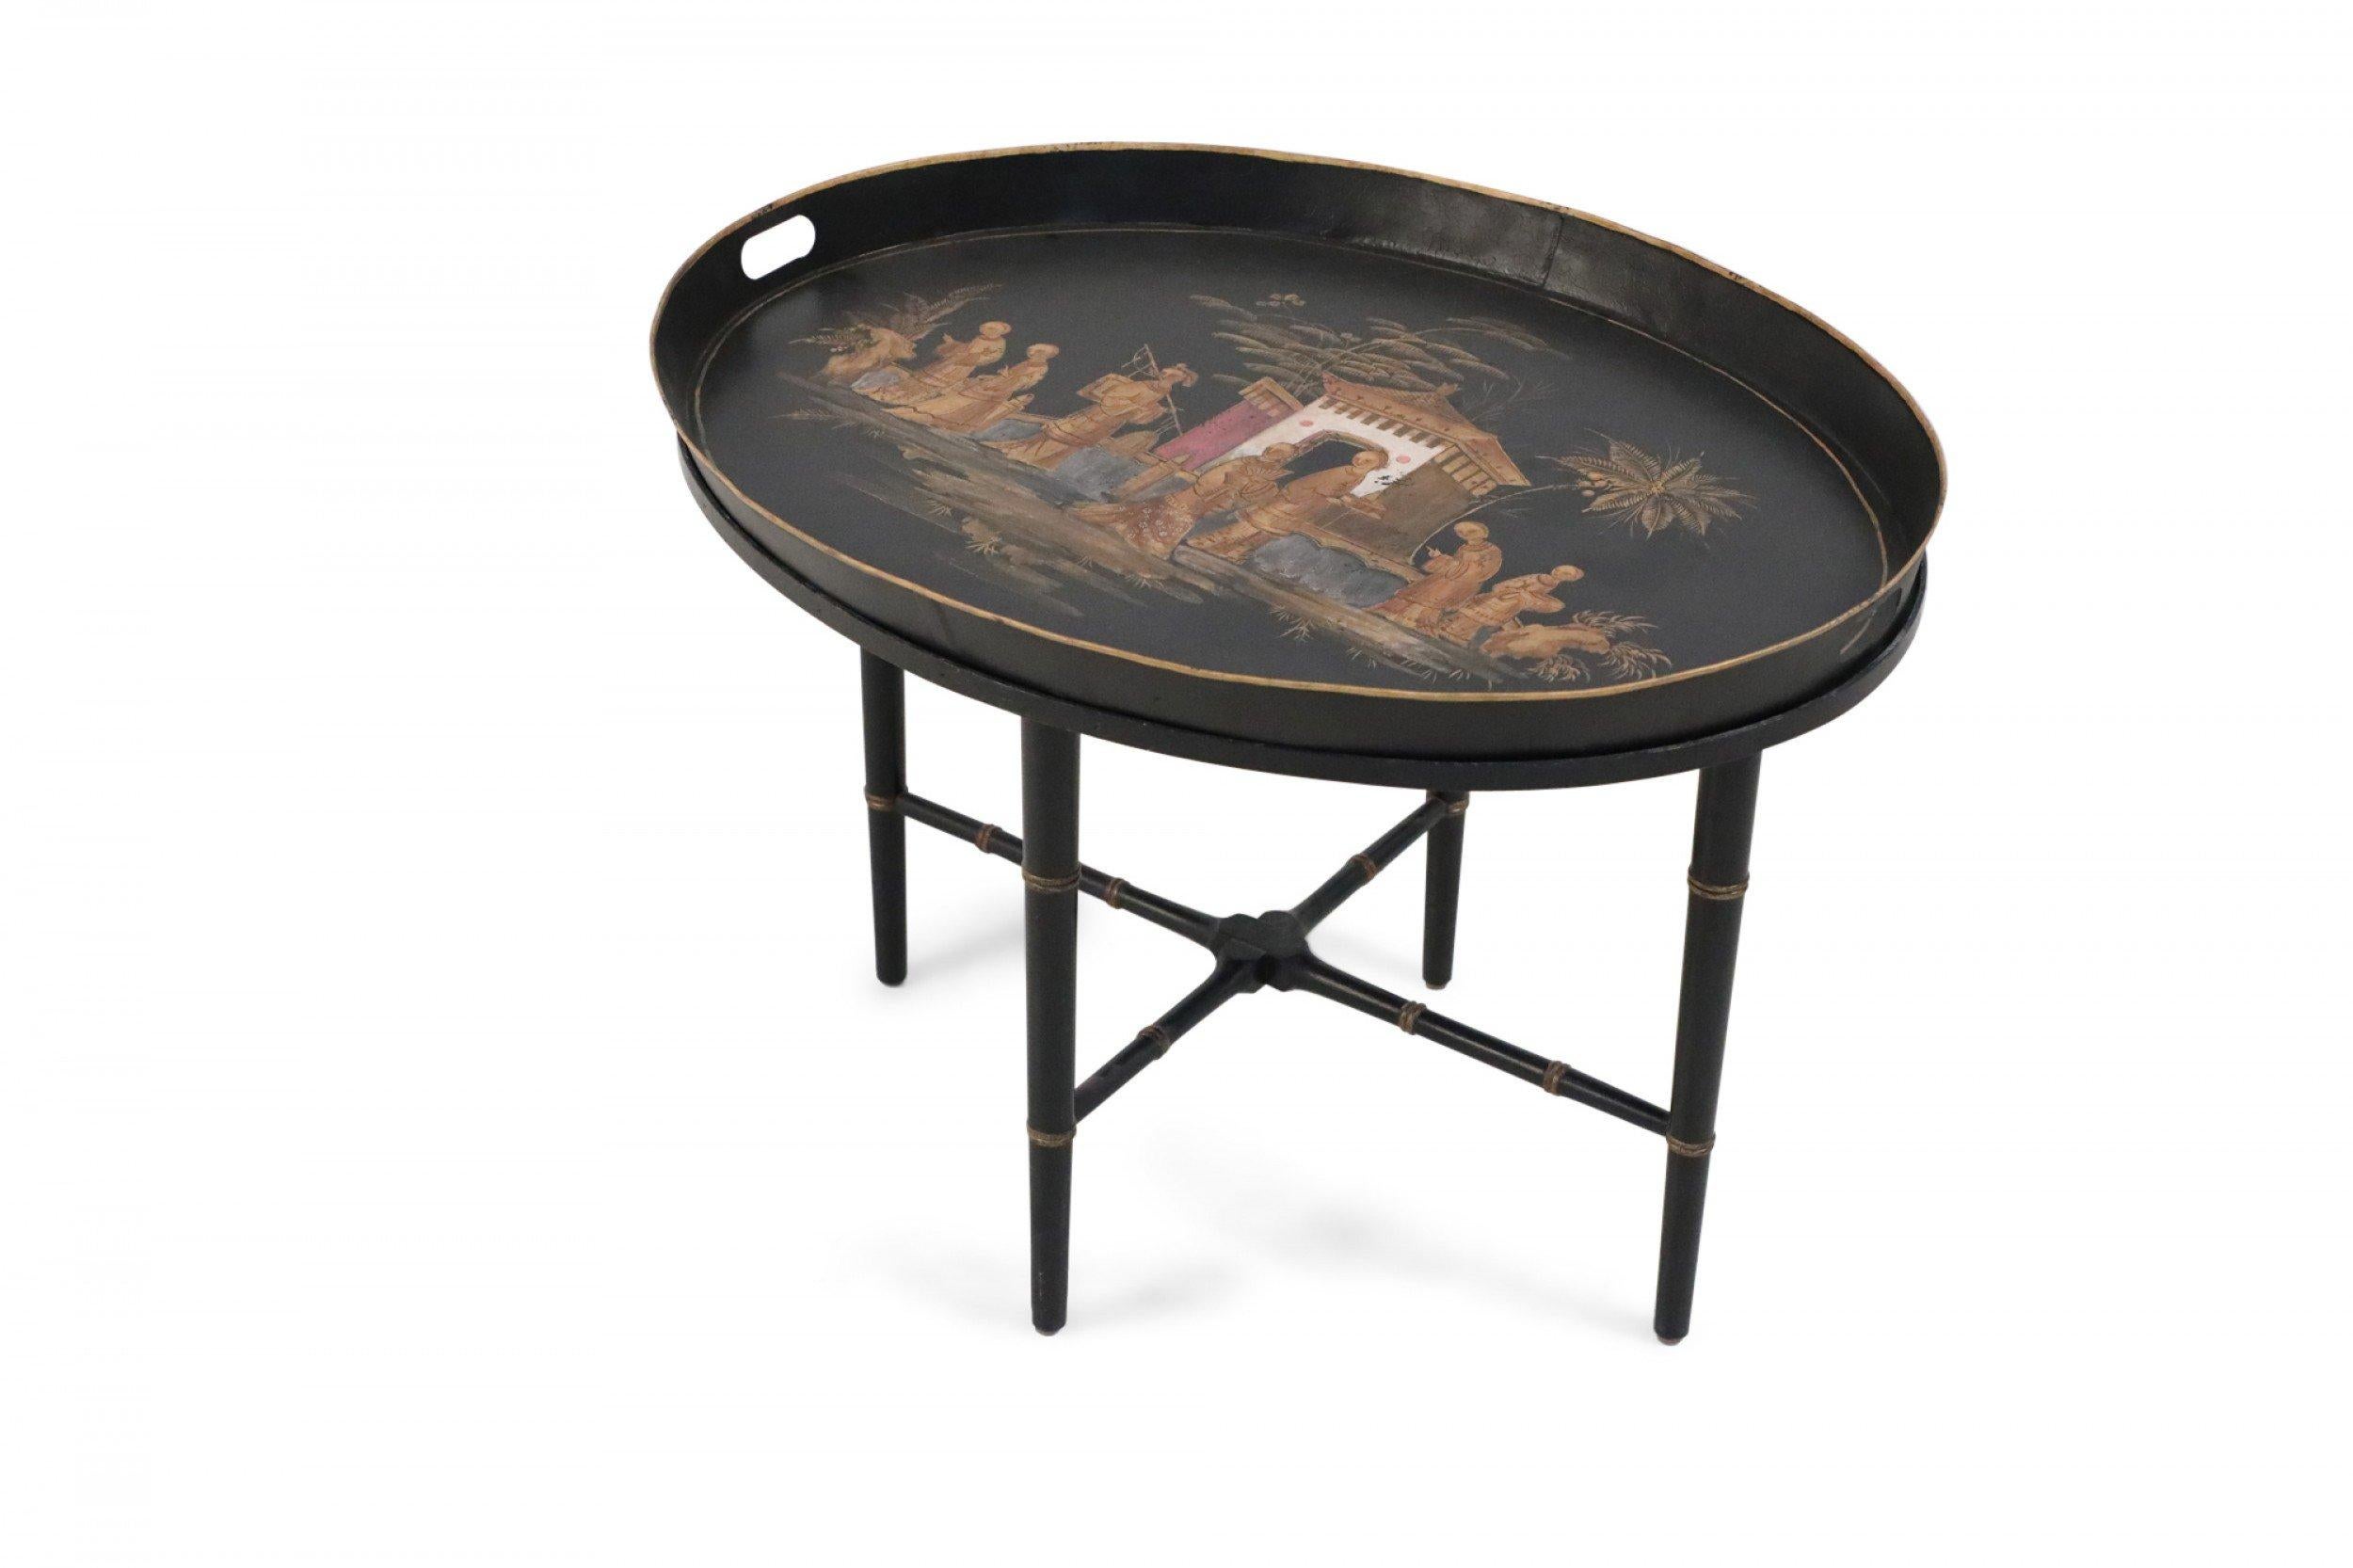 Chinoiserie tray top coffee table in black, topped with an oval, removable tray painted in a figurative scene, sitting atop ebonized faux bamboo legs accented in gold and connected with an x-shaped stretcher.
 